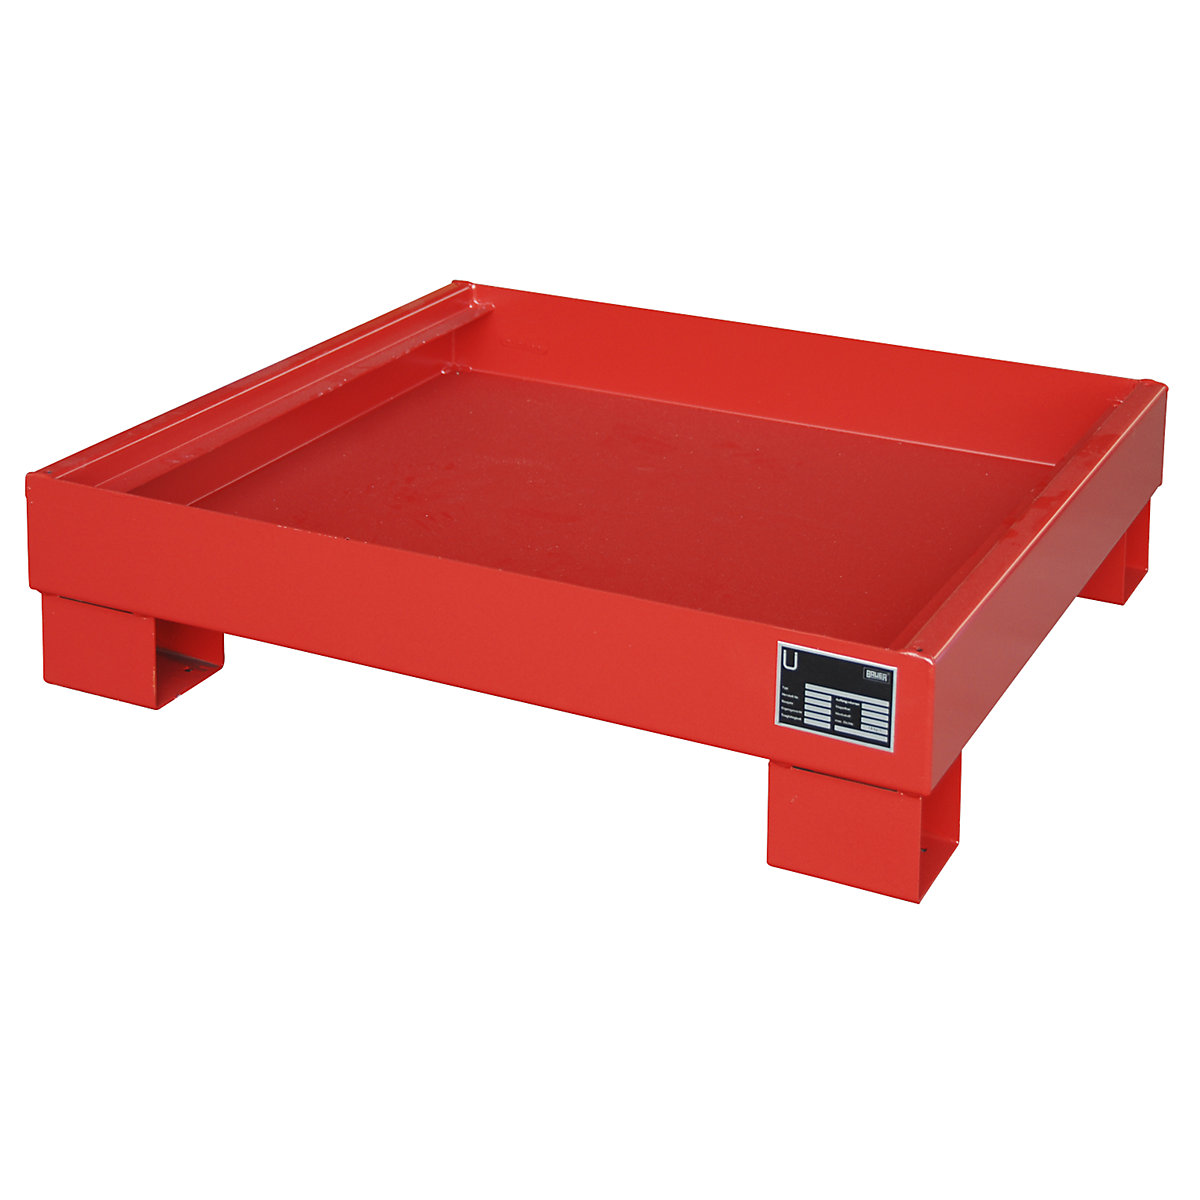 Steel sump tray for 60 l drum – eurokraft pro, LxWxH 800 x 900 x 220 mm, painted flame red RAL 3000, without grate-7